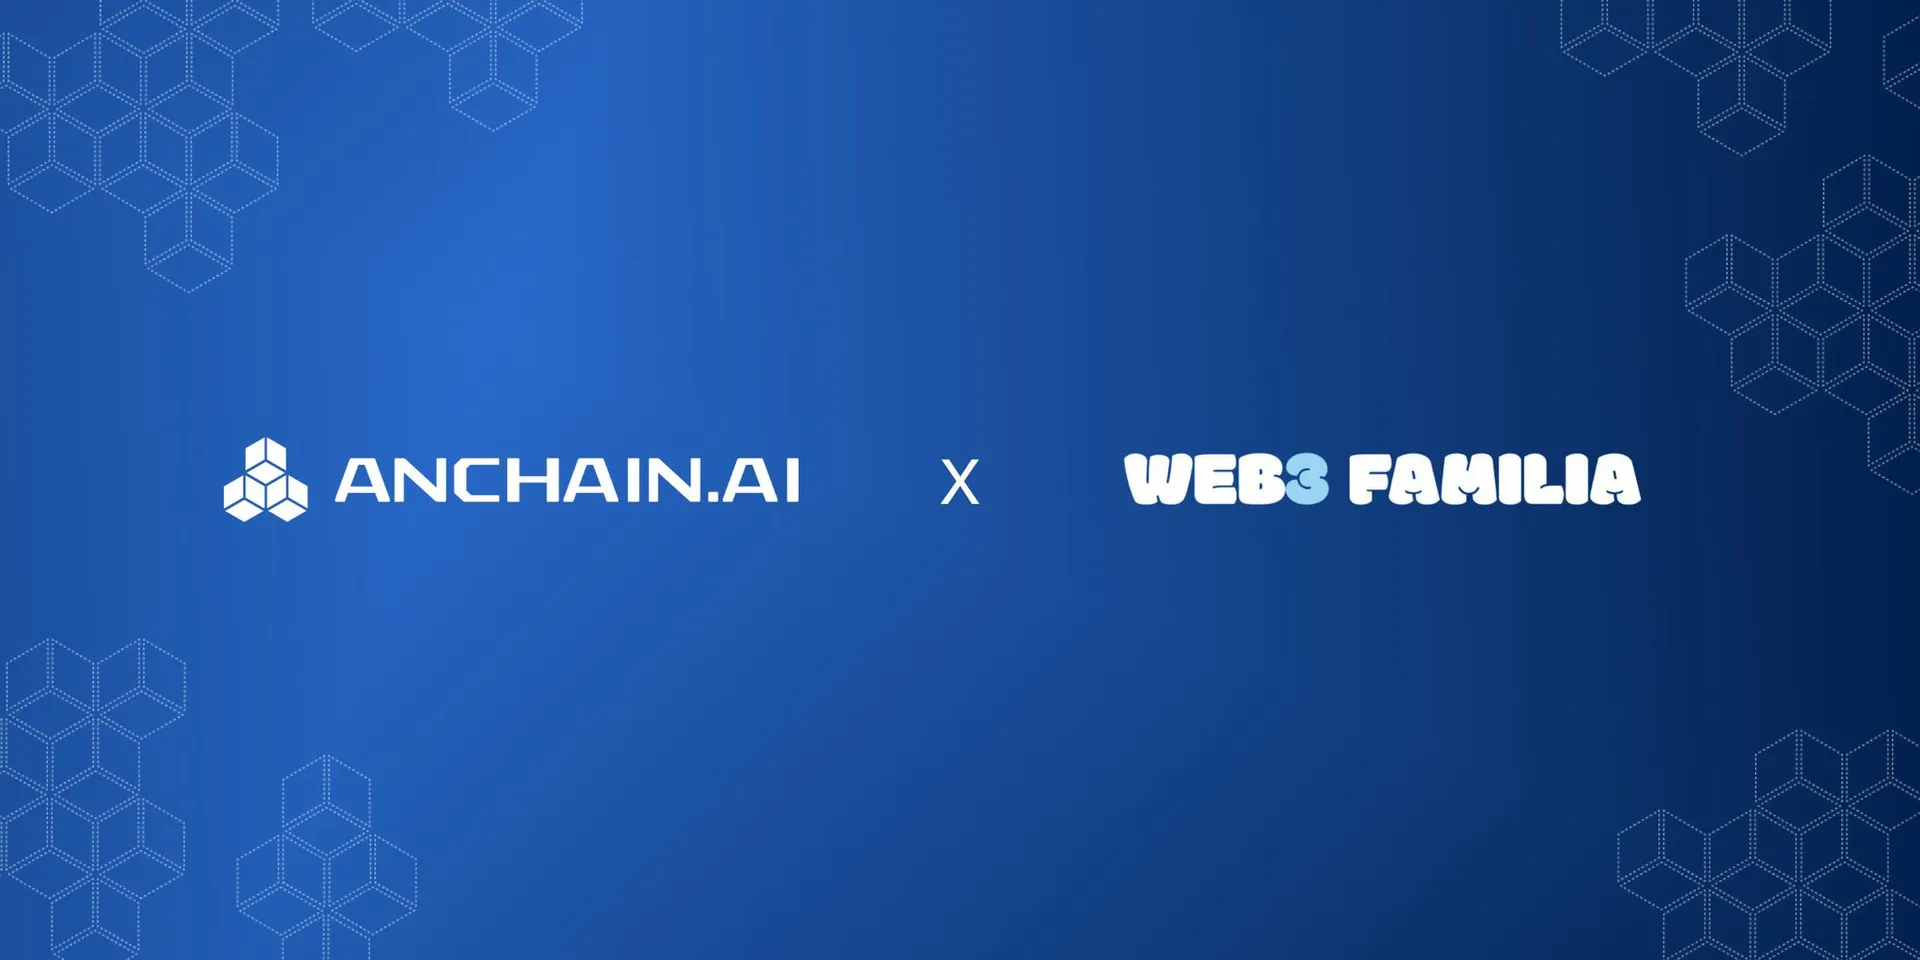 🚀 #AnChainAI thrilled to partner with #Web3Familia to provide the community with access to AnChain University’s Fundamentals of Web3 course for FREE! Limited time only. Subscribe to their newsletter to learn more  web3familia.substack.com 🧵